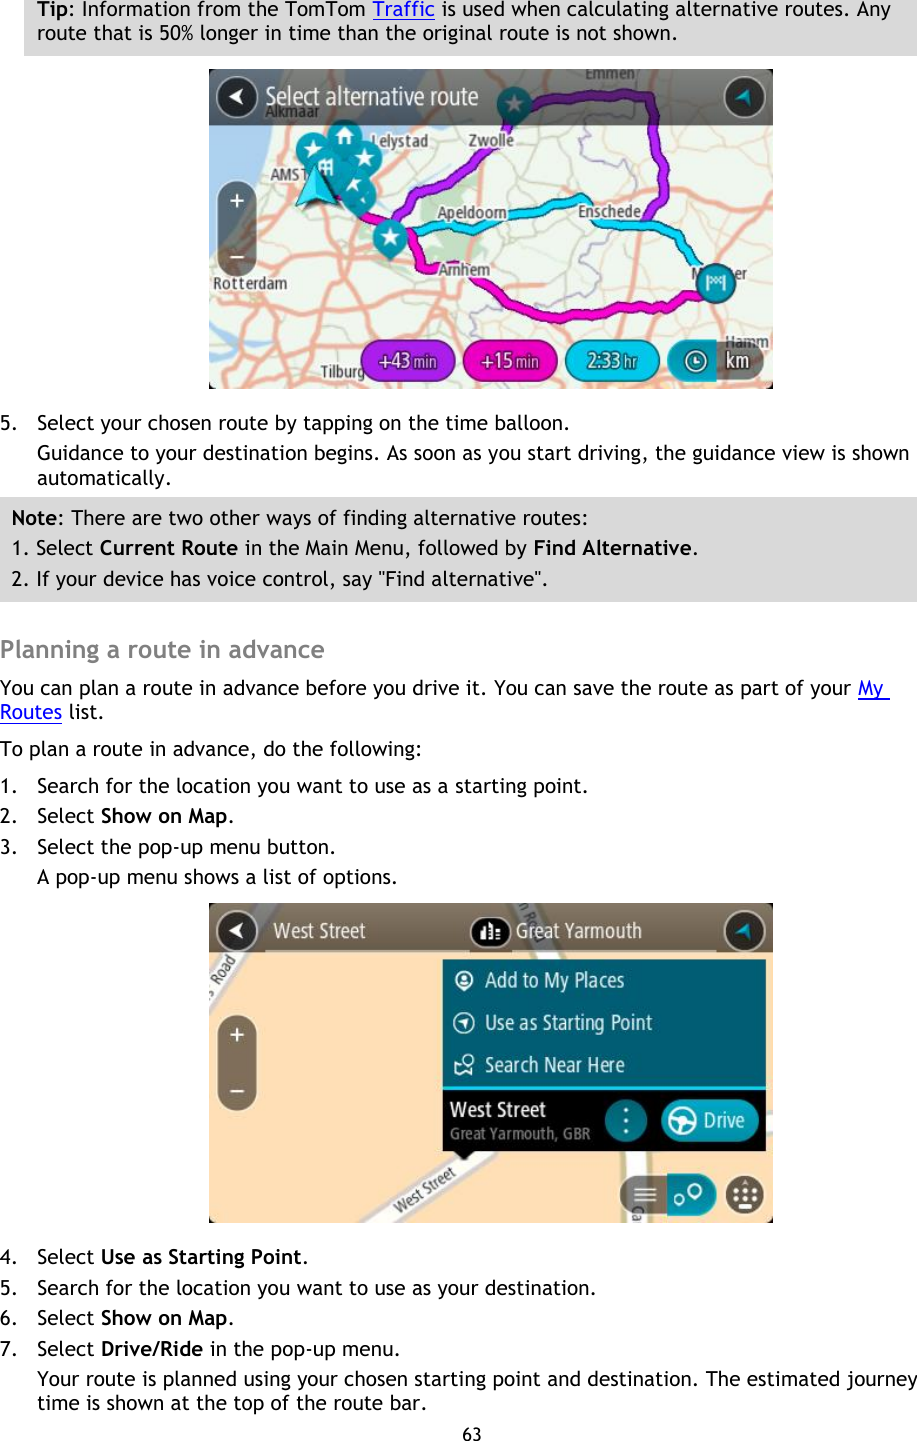 63    Tip: Information from the TomTom Traffic is used when calculating alternative routes. Any route that is 50% longer in time than the original route is not shown.  5. Select your chosen route by tapping on the time balloon. Guidance to your destination begins. As soon as you start driving, the guidance view is shown automatically. Note: There are two other ways of finding alternative routes:   1. Select Current Route in the Main Menu, followed by Find Alternative. 2. If your device has voice control, say &quot;Find alternative&quot;.  Planning a route in advance You can plan a route in advance before you drive it. You can save the route as part of your My Routes list.   To plan a route in advance, do the following: 1. Search for the location you want to use as a starting point. 2. Select Show on Map. 3. Select the pop-up menu button. A pop-up menu shows a list of options.  4. Select Use as Starting Point. 5. Search for the location you want to use as your destination. 6. Select Show on Map. 7. Select Drive/Ride in the pop-up menu. Your route is planned using your chosen starting point and destination. The estimated journey time is shown at the top of the route bar. 